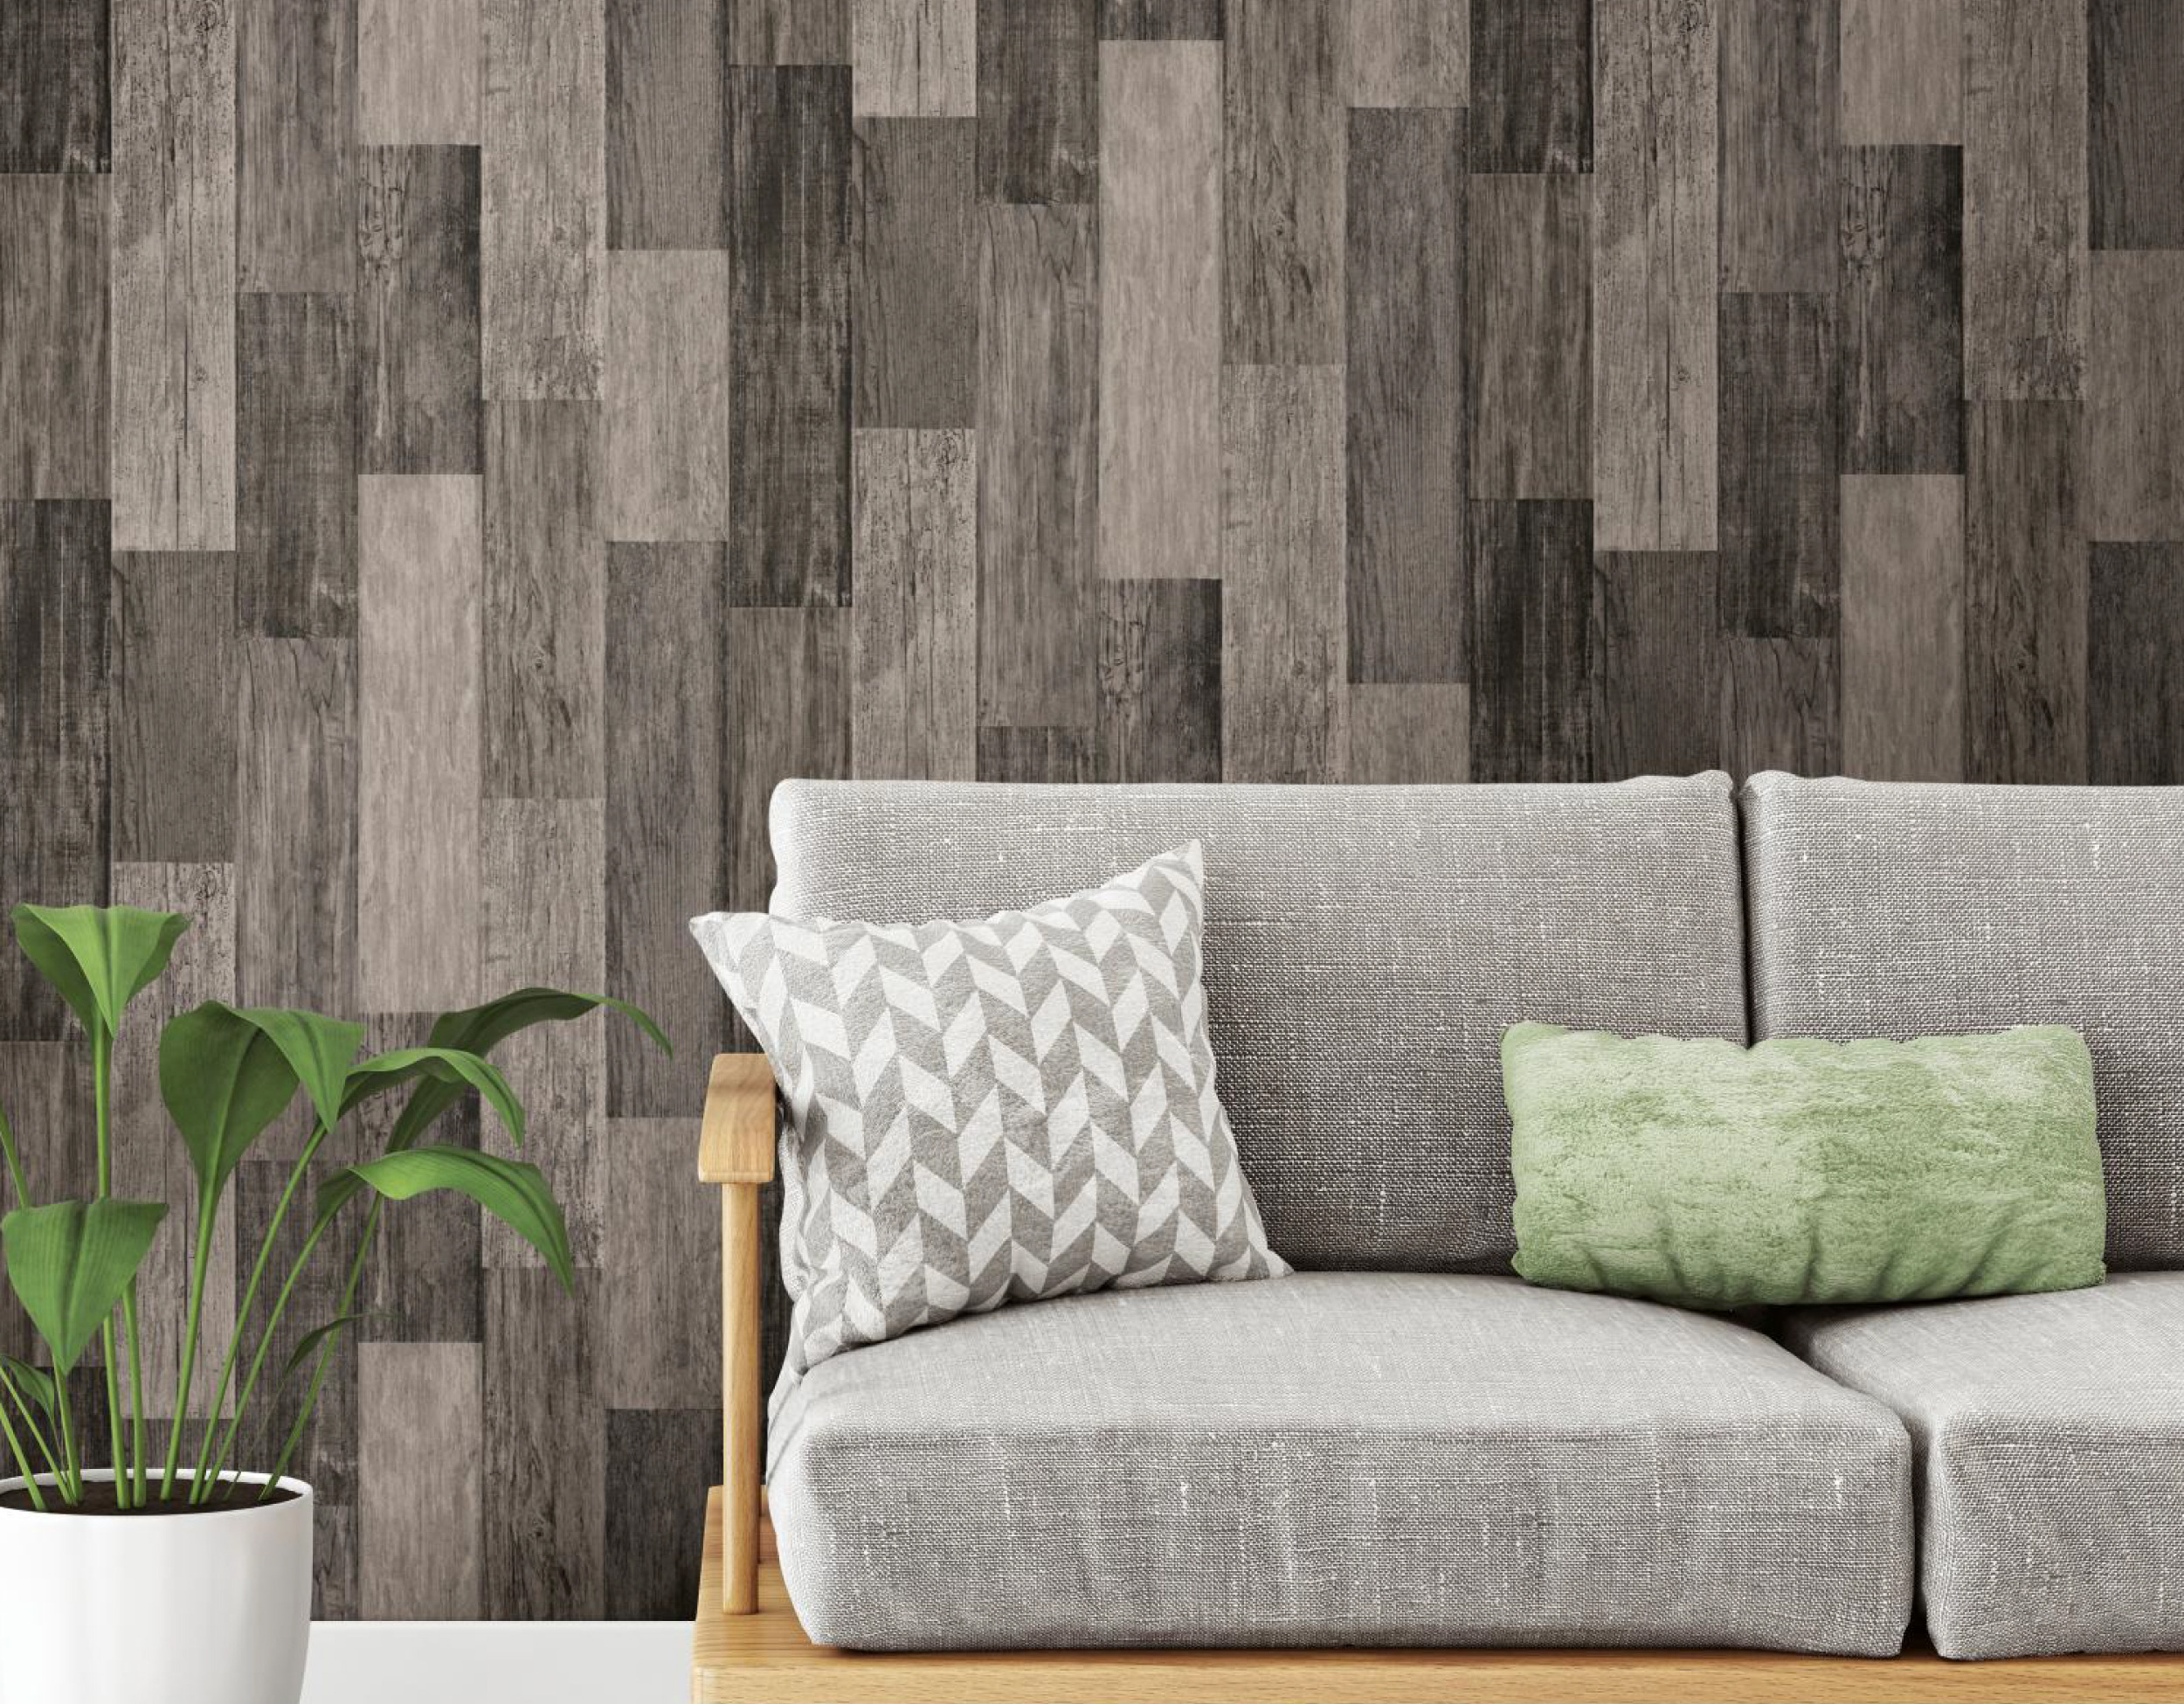 Weathered Black Tricolor Rustic Wood Planks Wallpaper